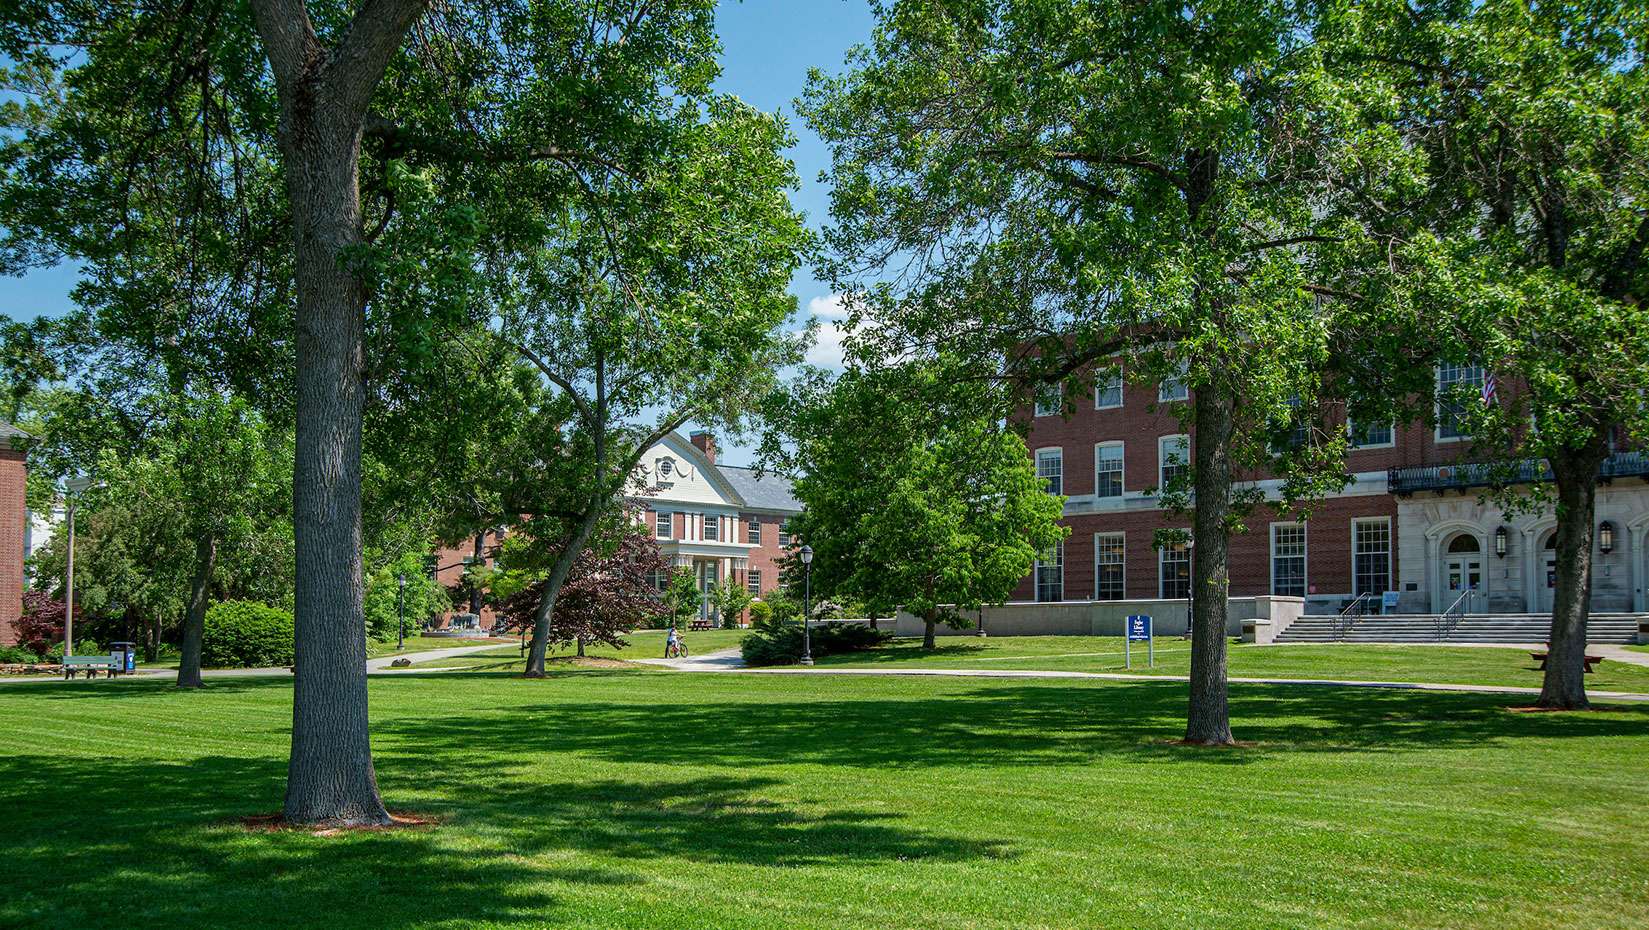 Campus grounds in the summer